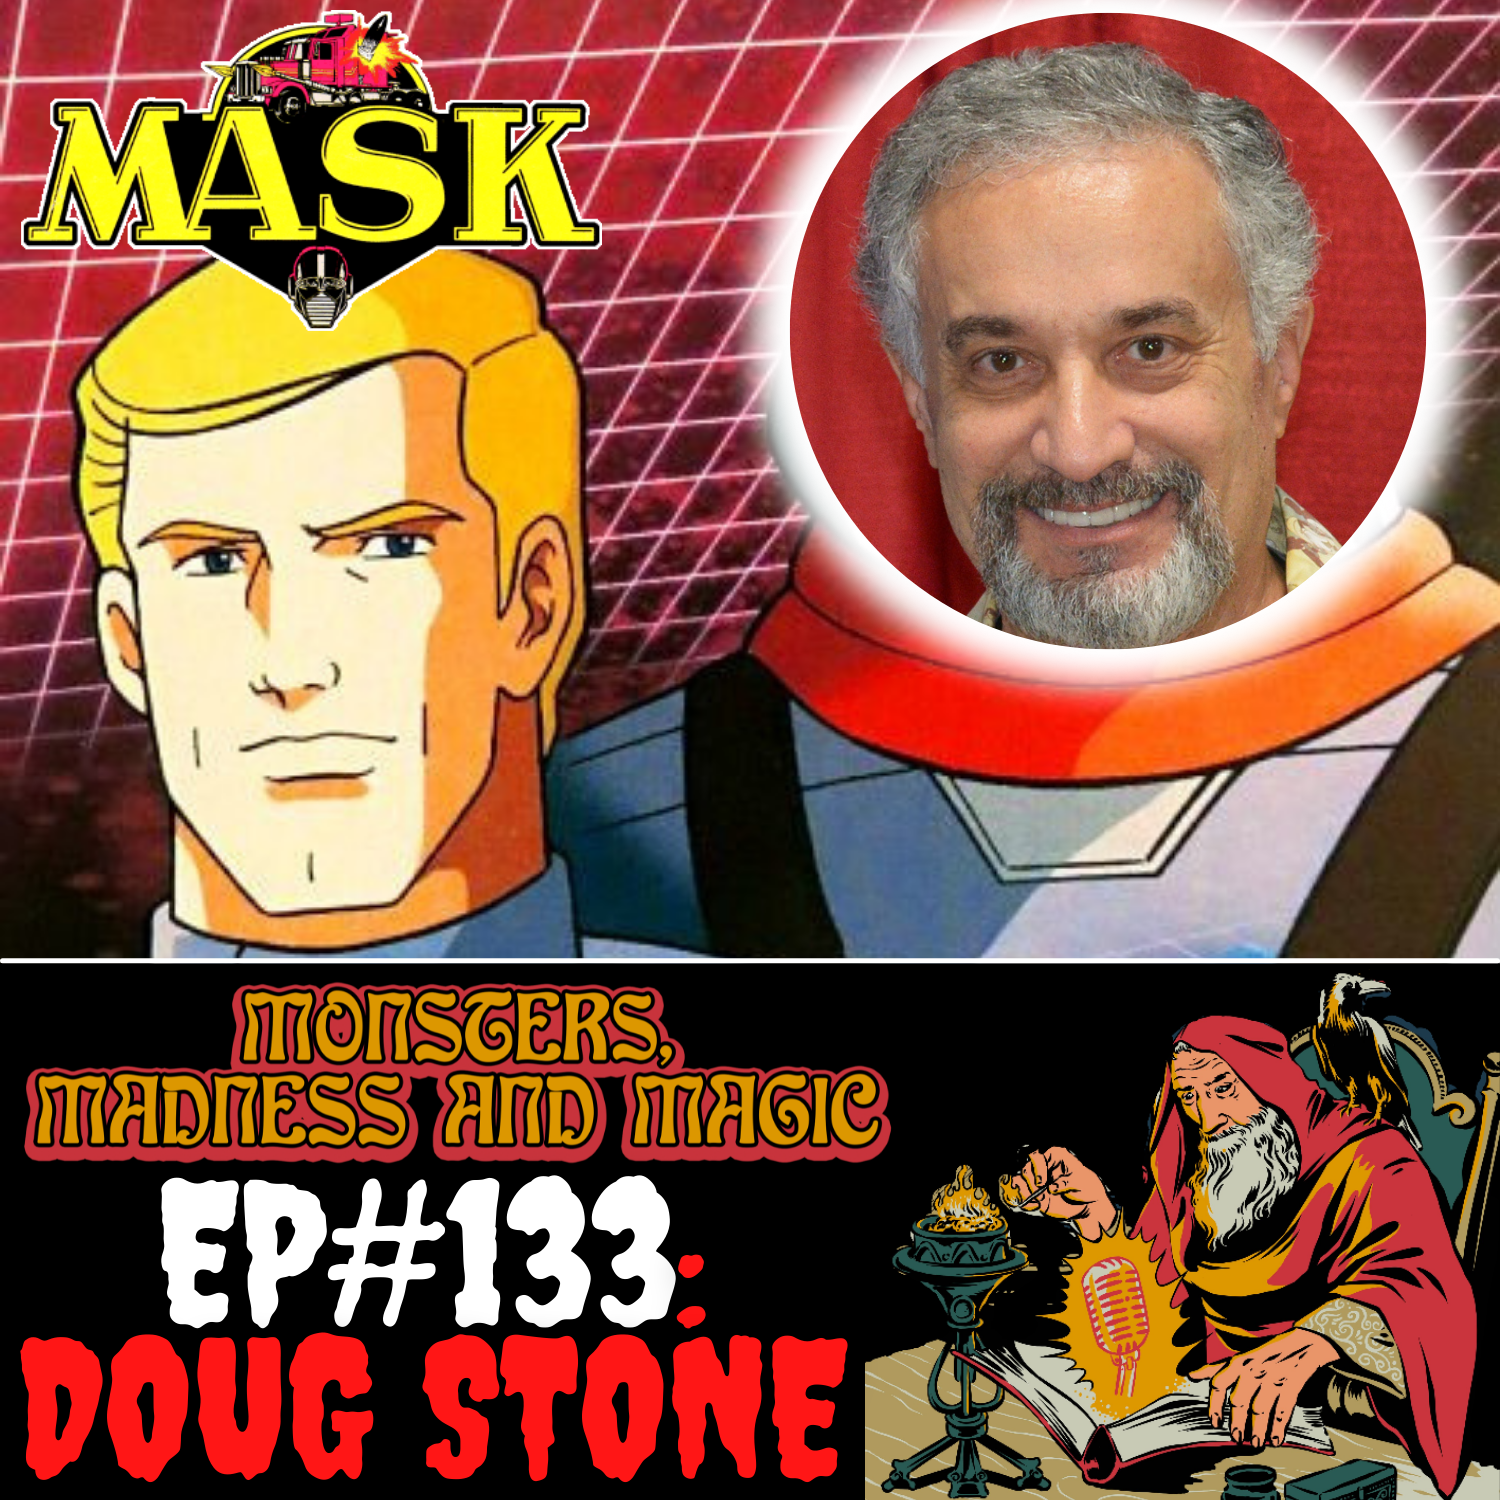 EP#133: Behind the M.A.S.K. - An Interview with Doug Stone